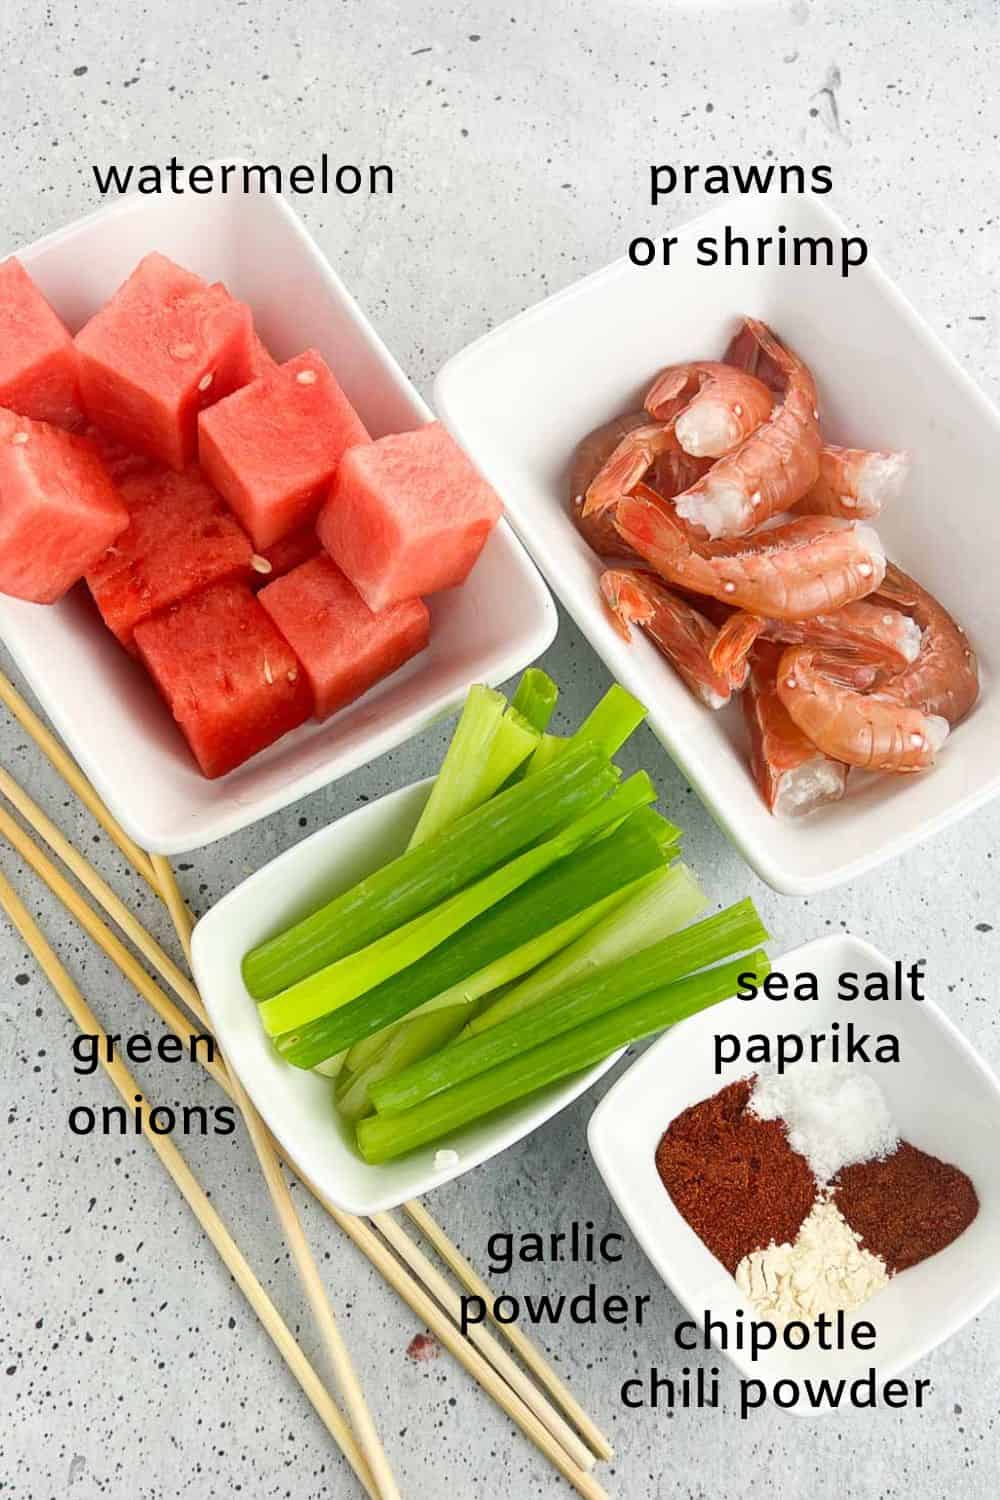 Labelled ingredients for grilled watermelon spot prawn skewers.